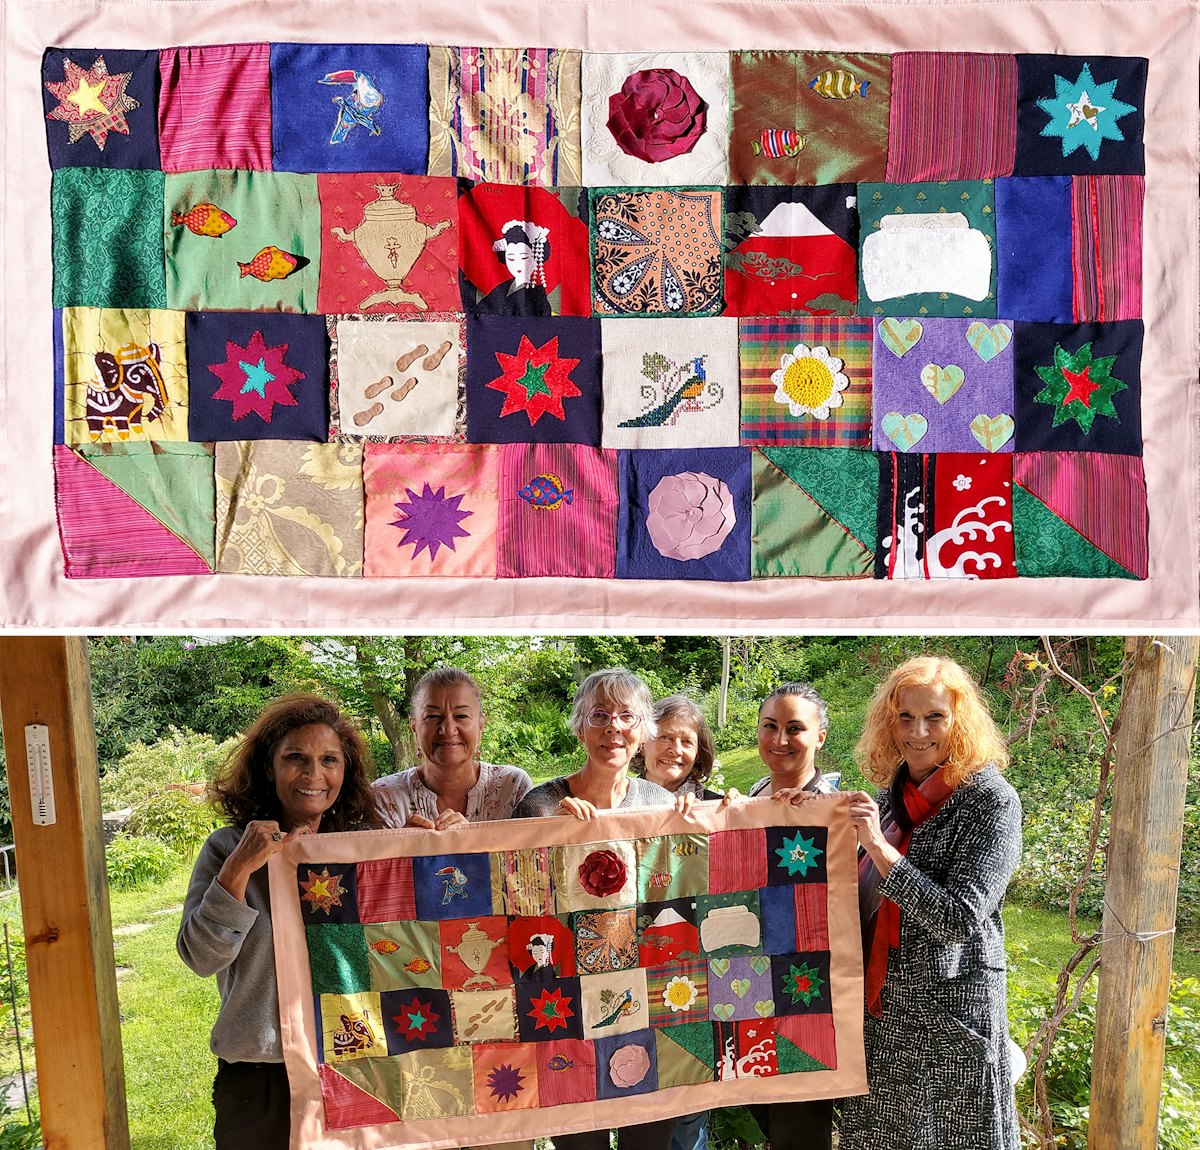 In Switzerland, participants of Bahá’í community-building activities drew on their diverse cultural backgrounds to create this quilt featuring metaphors inspired by the life of ‘Abdu’l-Bahá. The quilt was gifted to their local community center.